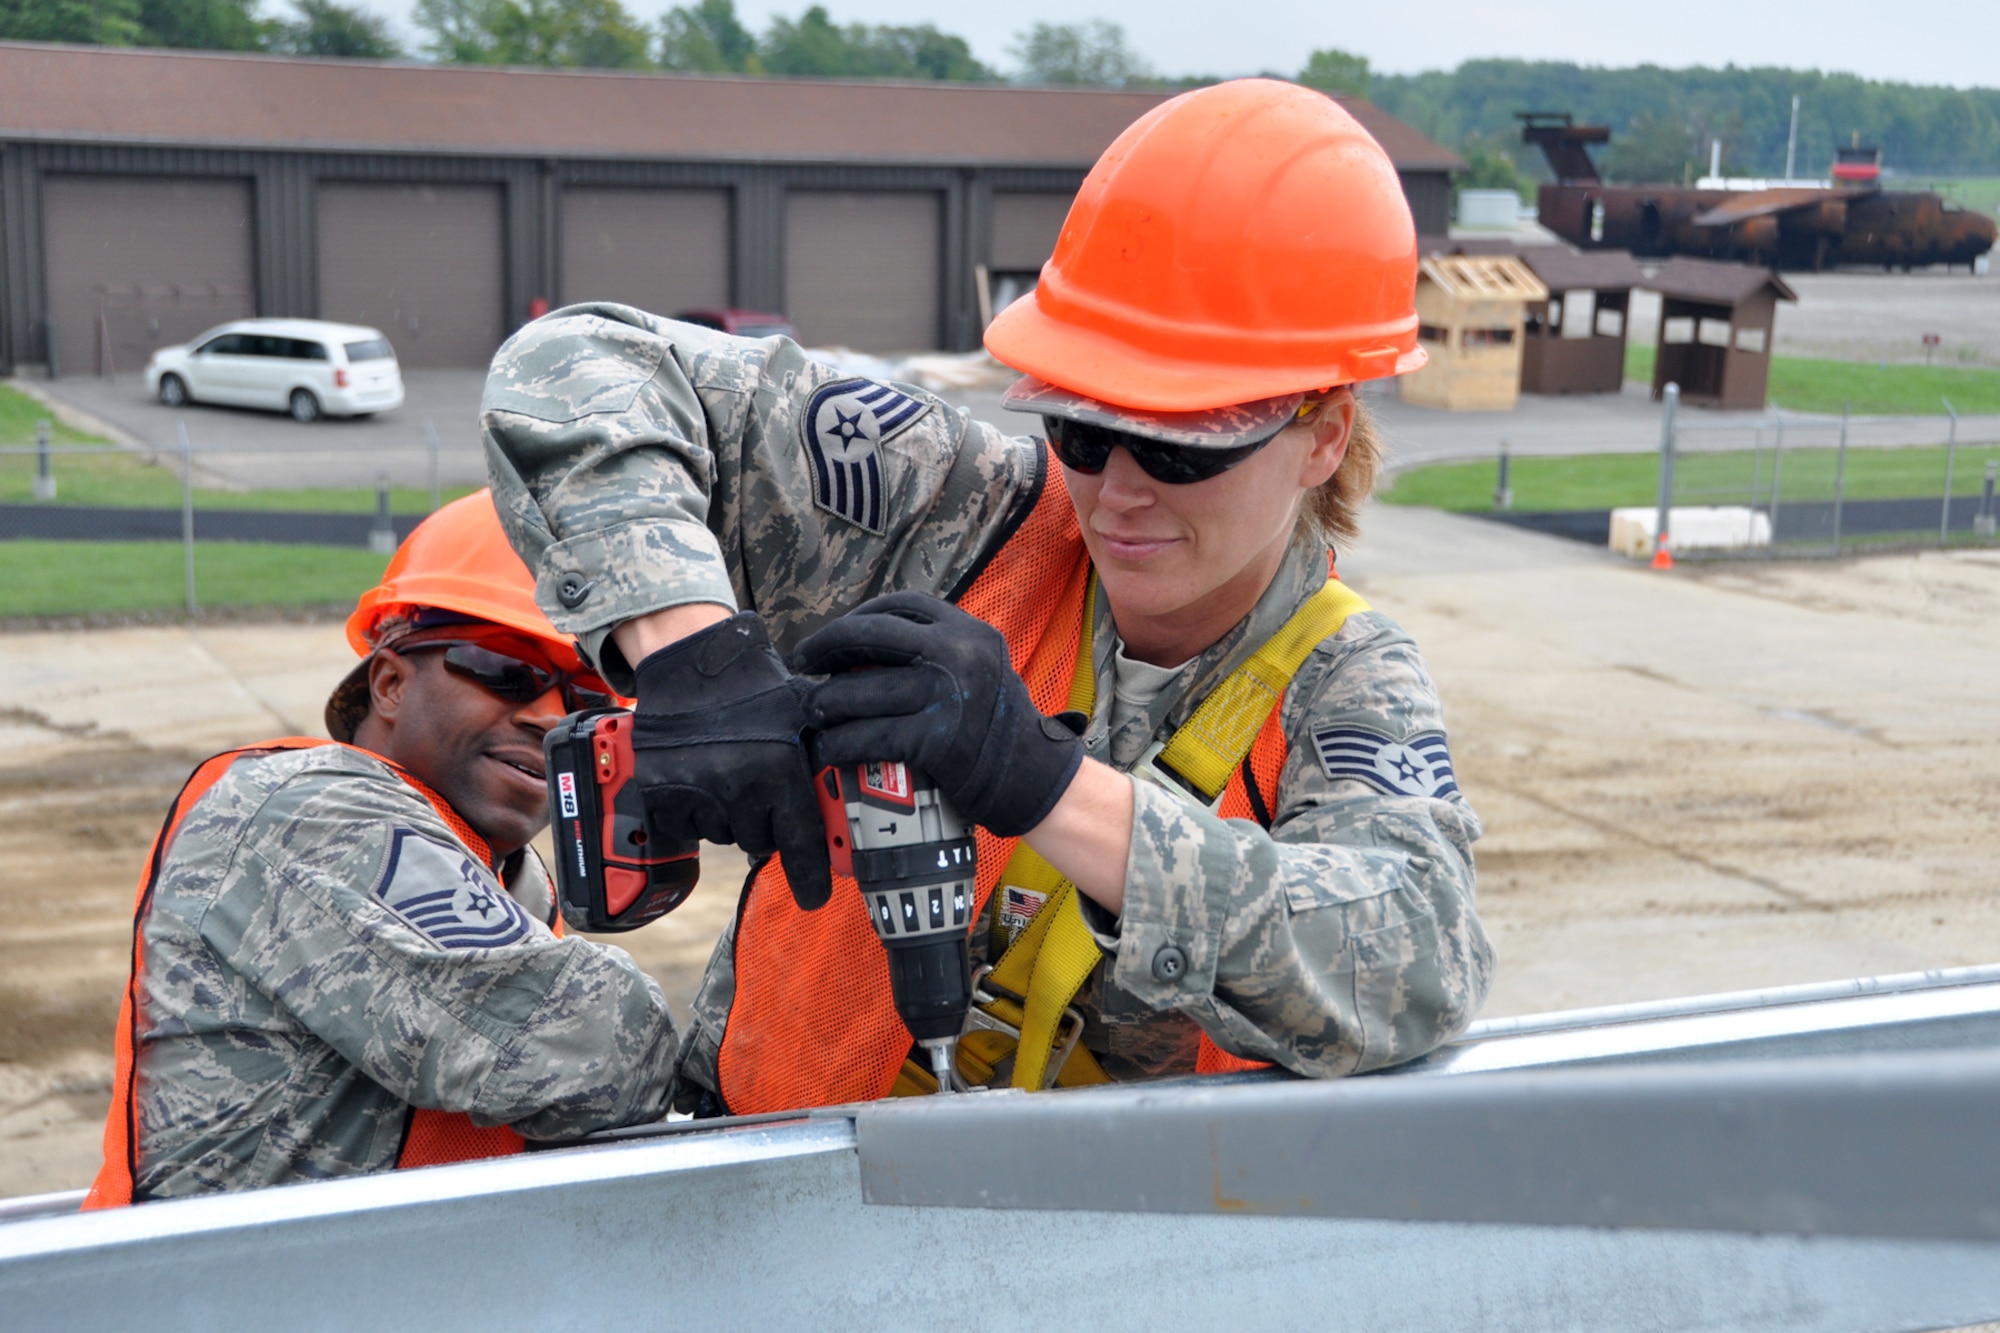 Master Sgt. Alfred Cain, a heating, ventilation, air conditioning and refrigeration technician, holds a support spacer in place as Staff Sgt. Angel Hirschi, a utilities journeyman, secures it to a metal beam at Youngstown Air Reserve Station, Vienna, Ohio, Aug. 14, 2012. Both Airmen were from the 307th Civil Engineer Squadron and were part of a 29-person detail from Barksdale Air Force Base, La., that spent two weeks at Youngstown assisting the 910 Civil Engineer Squadron build a Prime Base Engineer Emergency Force (Prime BEEF) training area. (U.S. Air Force photo by Master Sgt. Jeff Walston) 